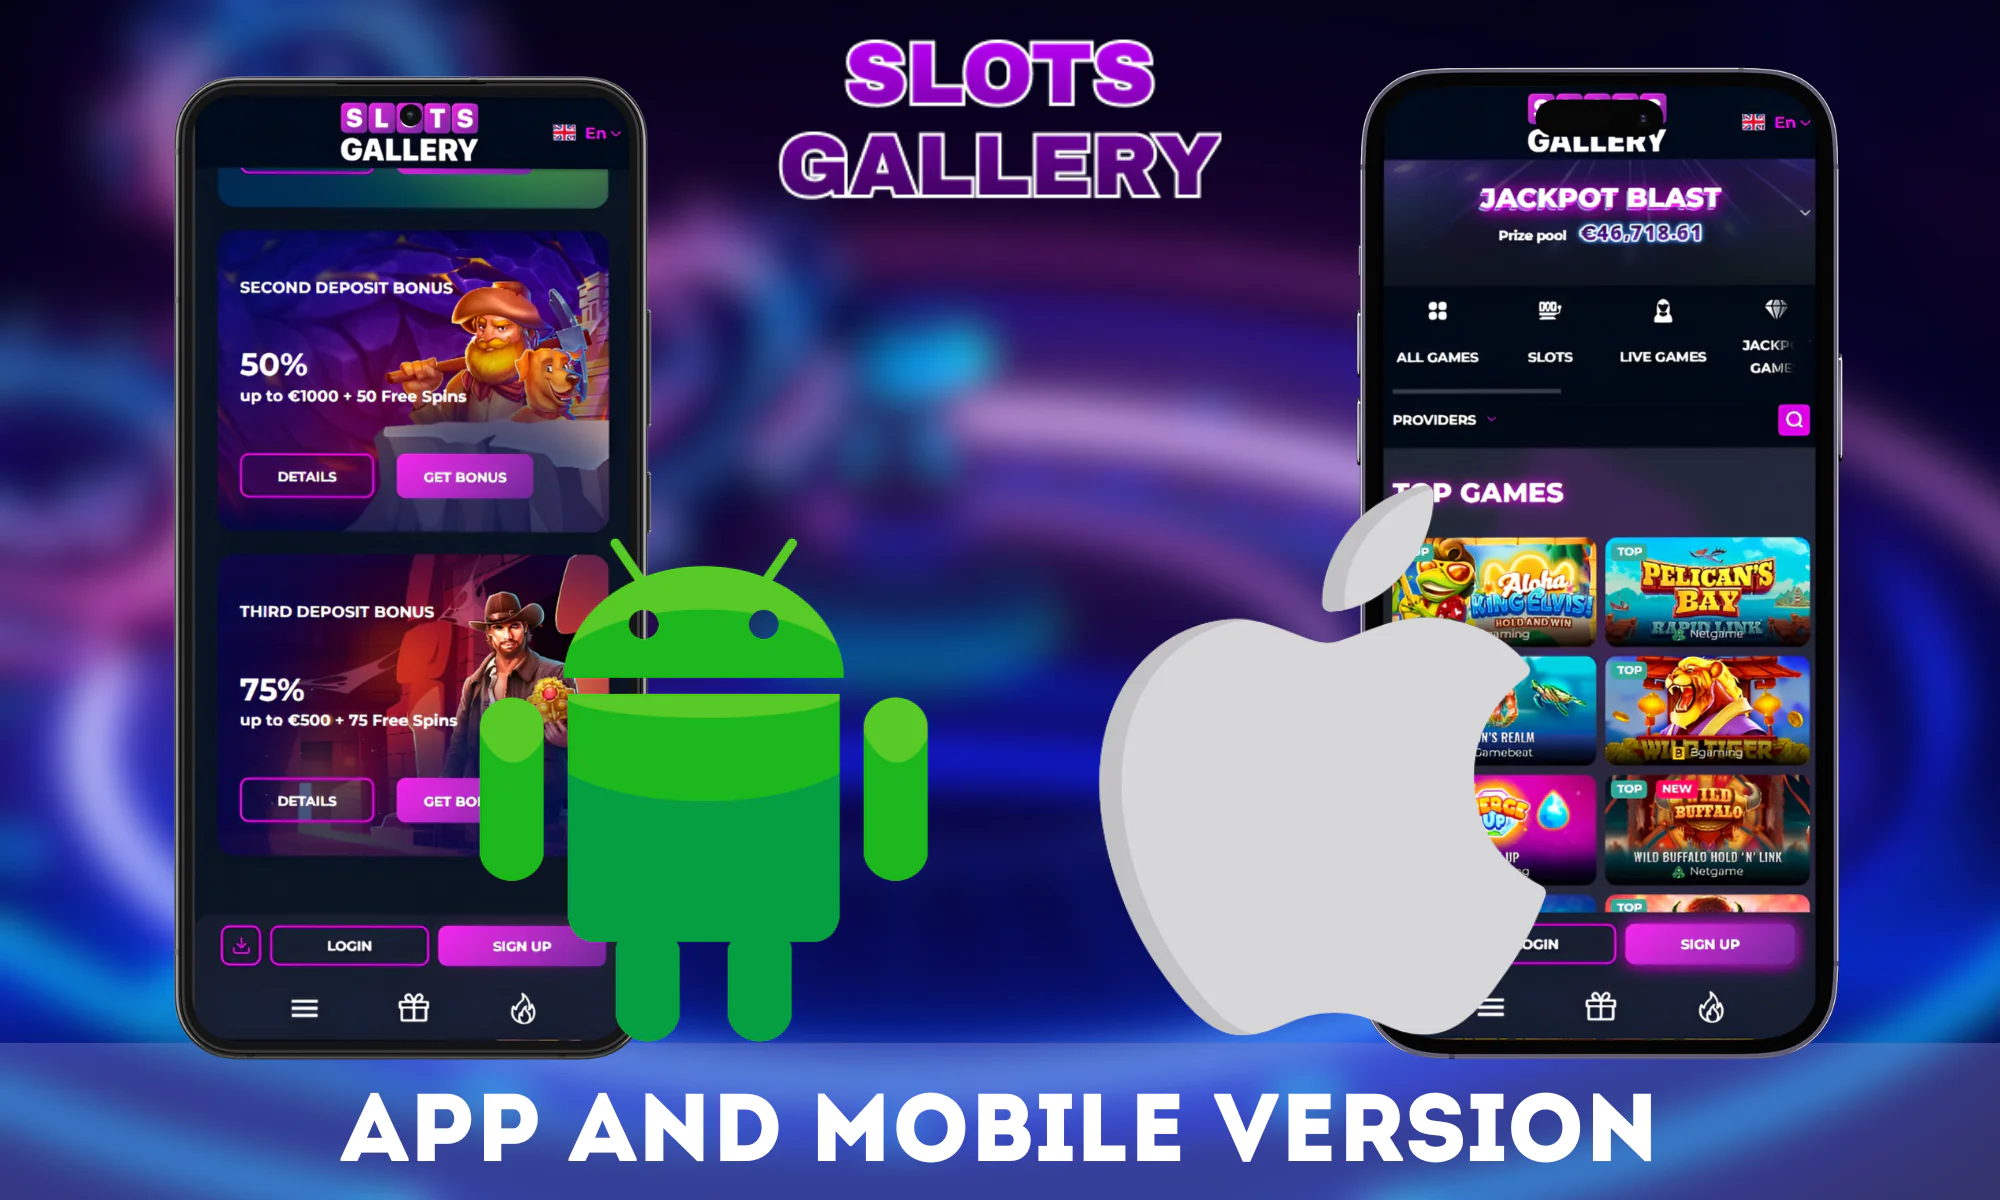 Slots Gallery appreciates the need for mobile access to gambling